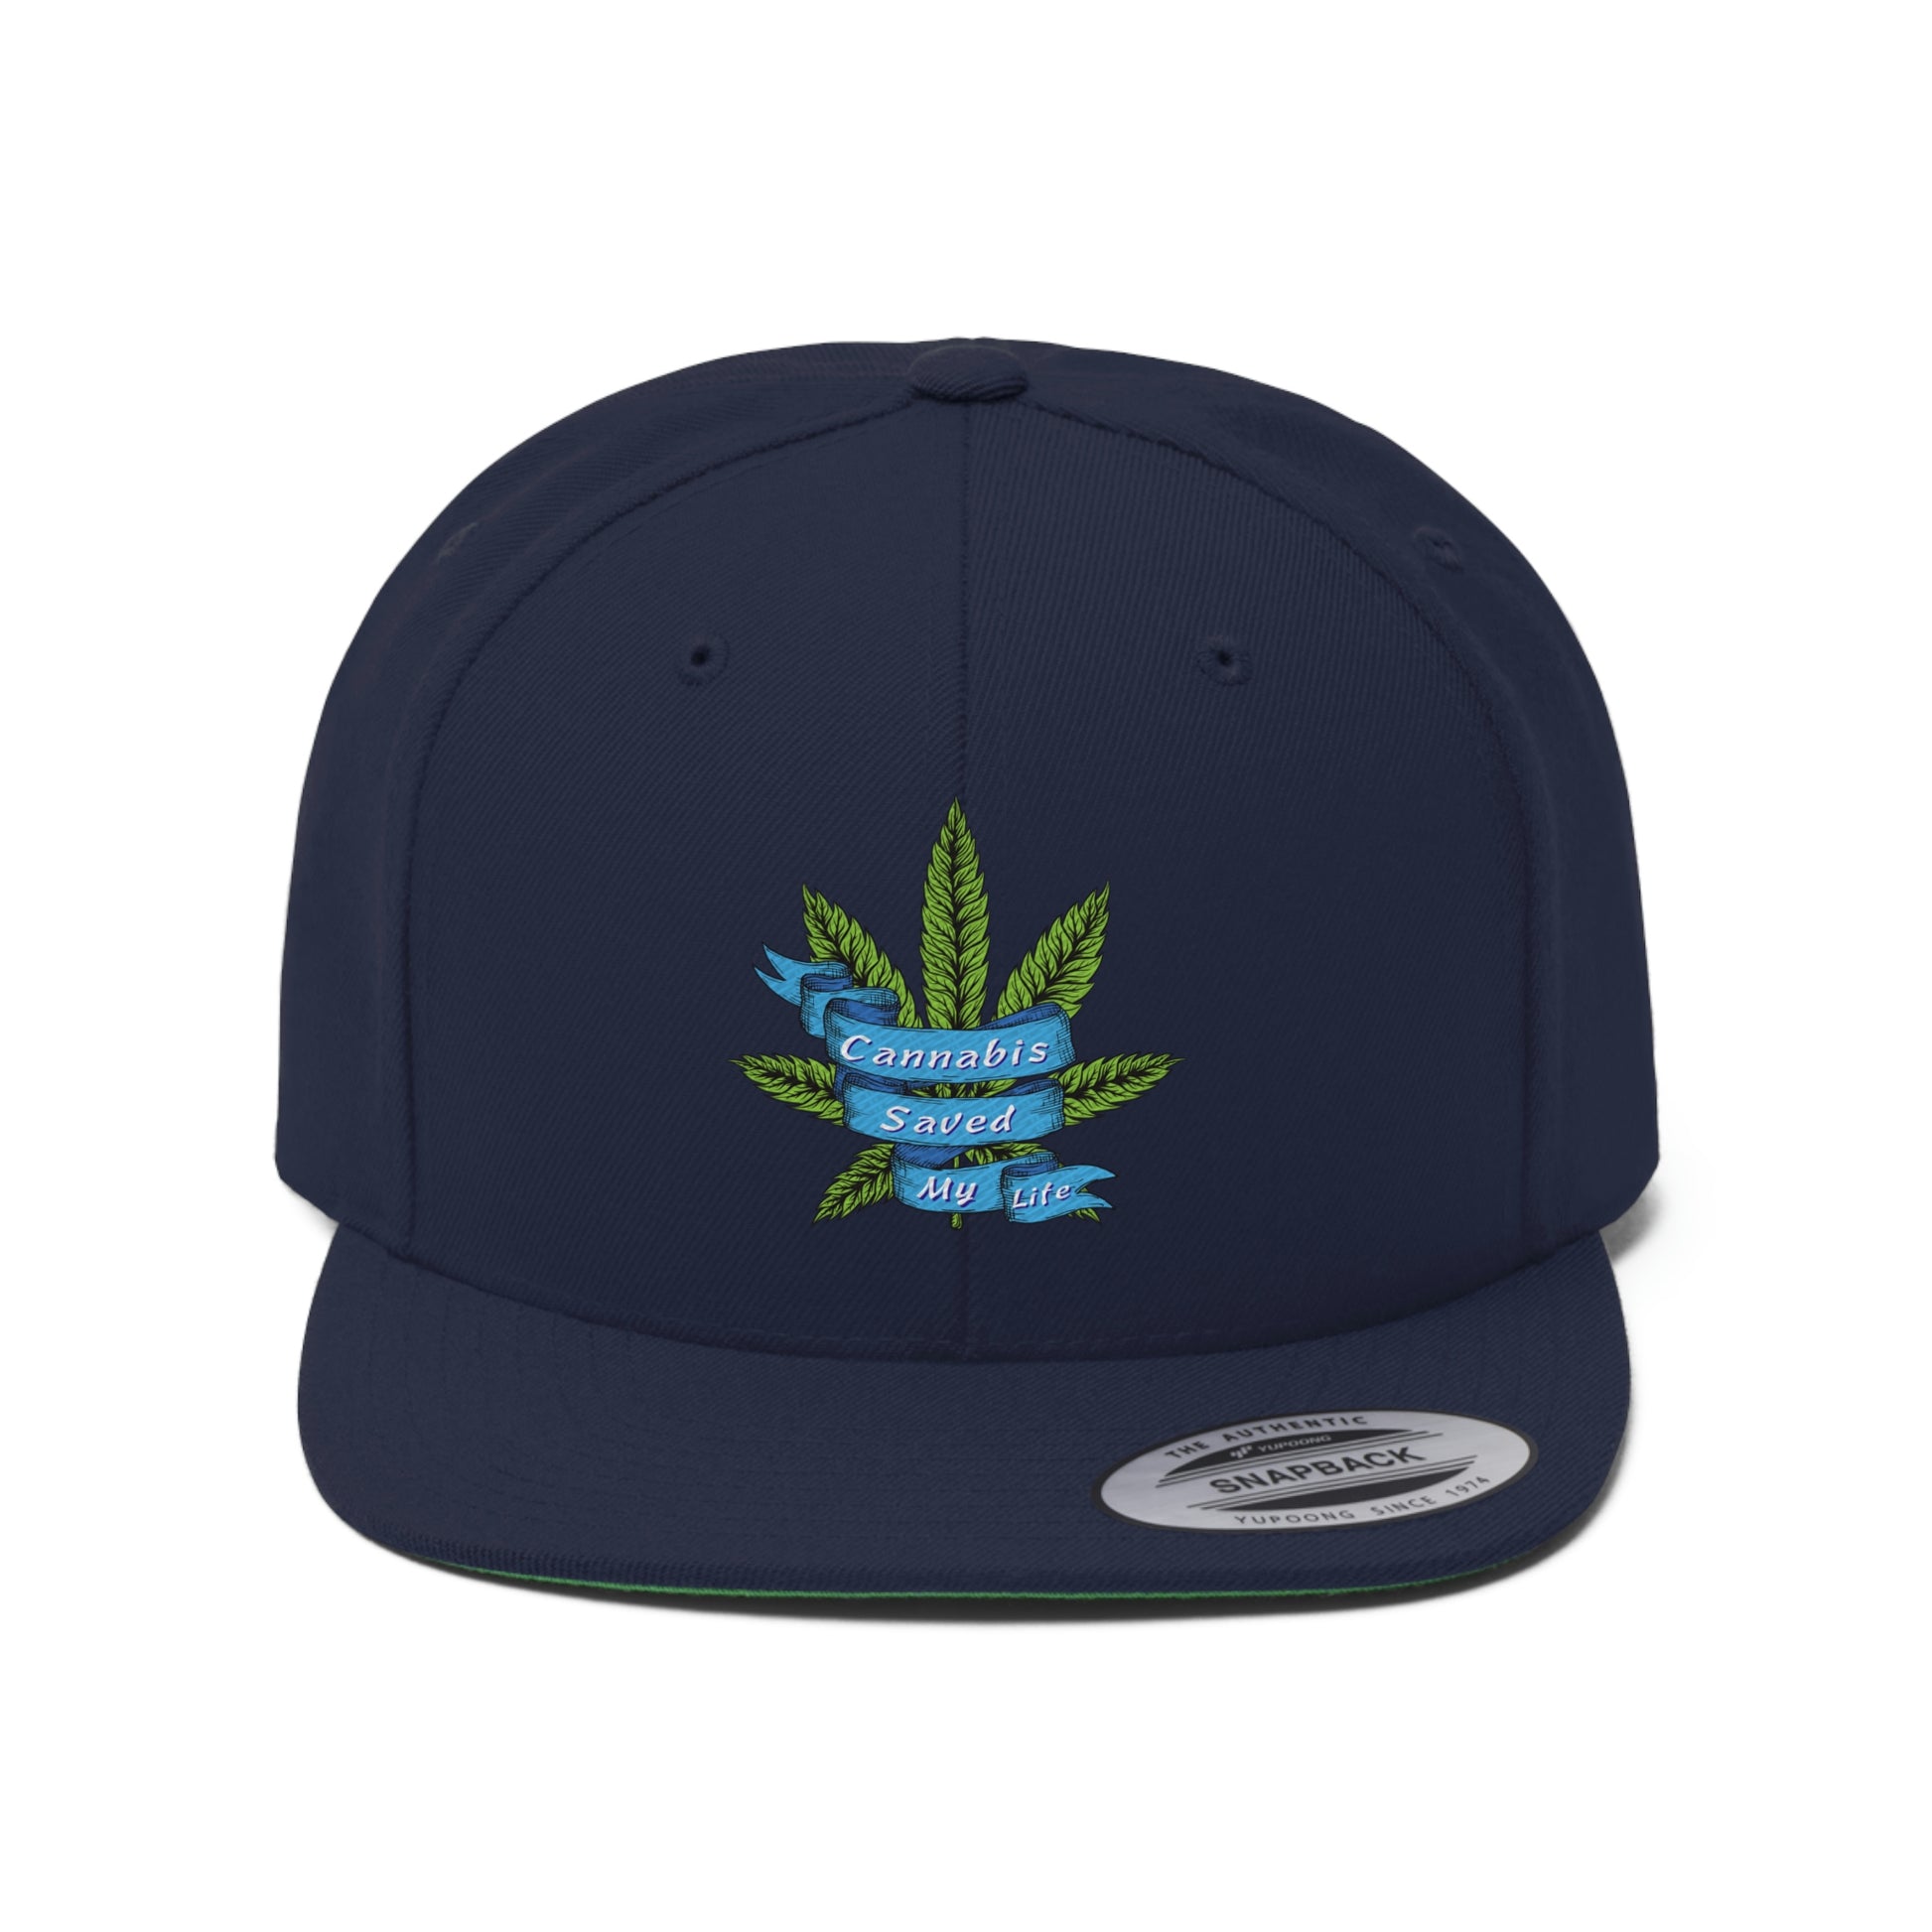 Still image of the Cannabis Saved My Life Snapback Hat in navy blue with green cannabis eaf